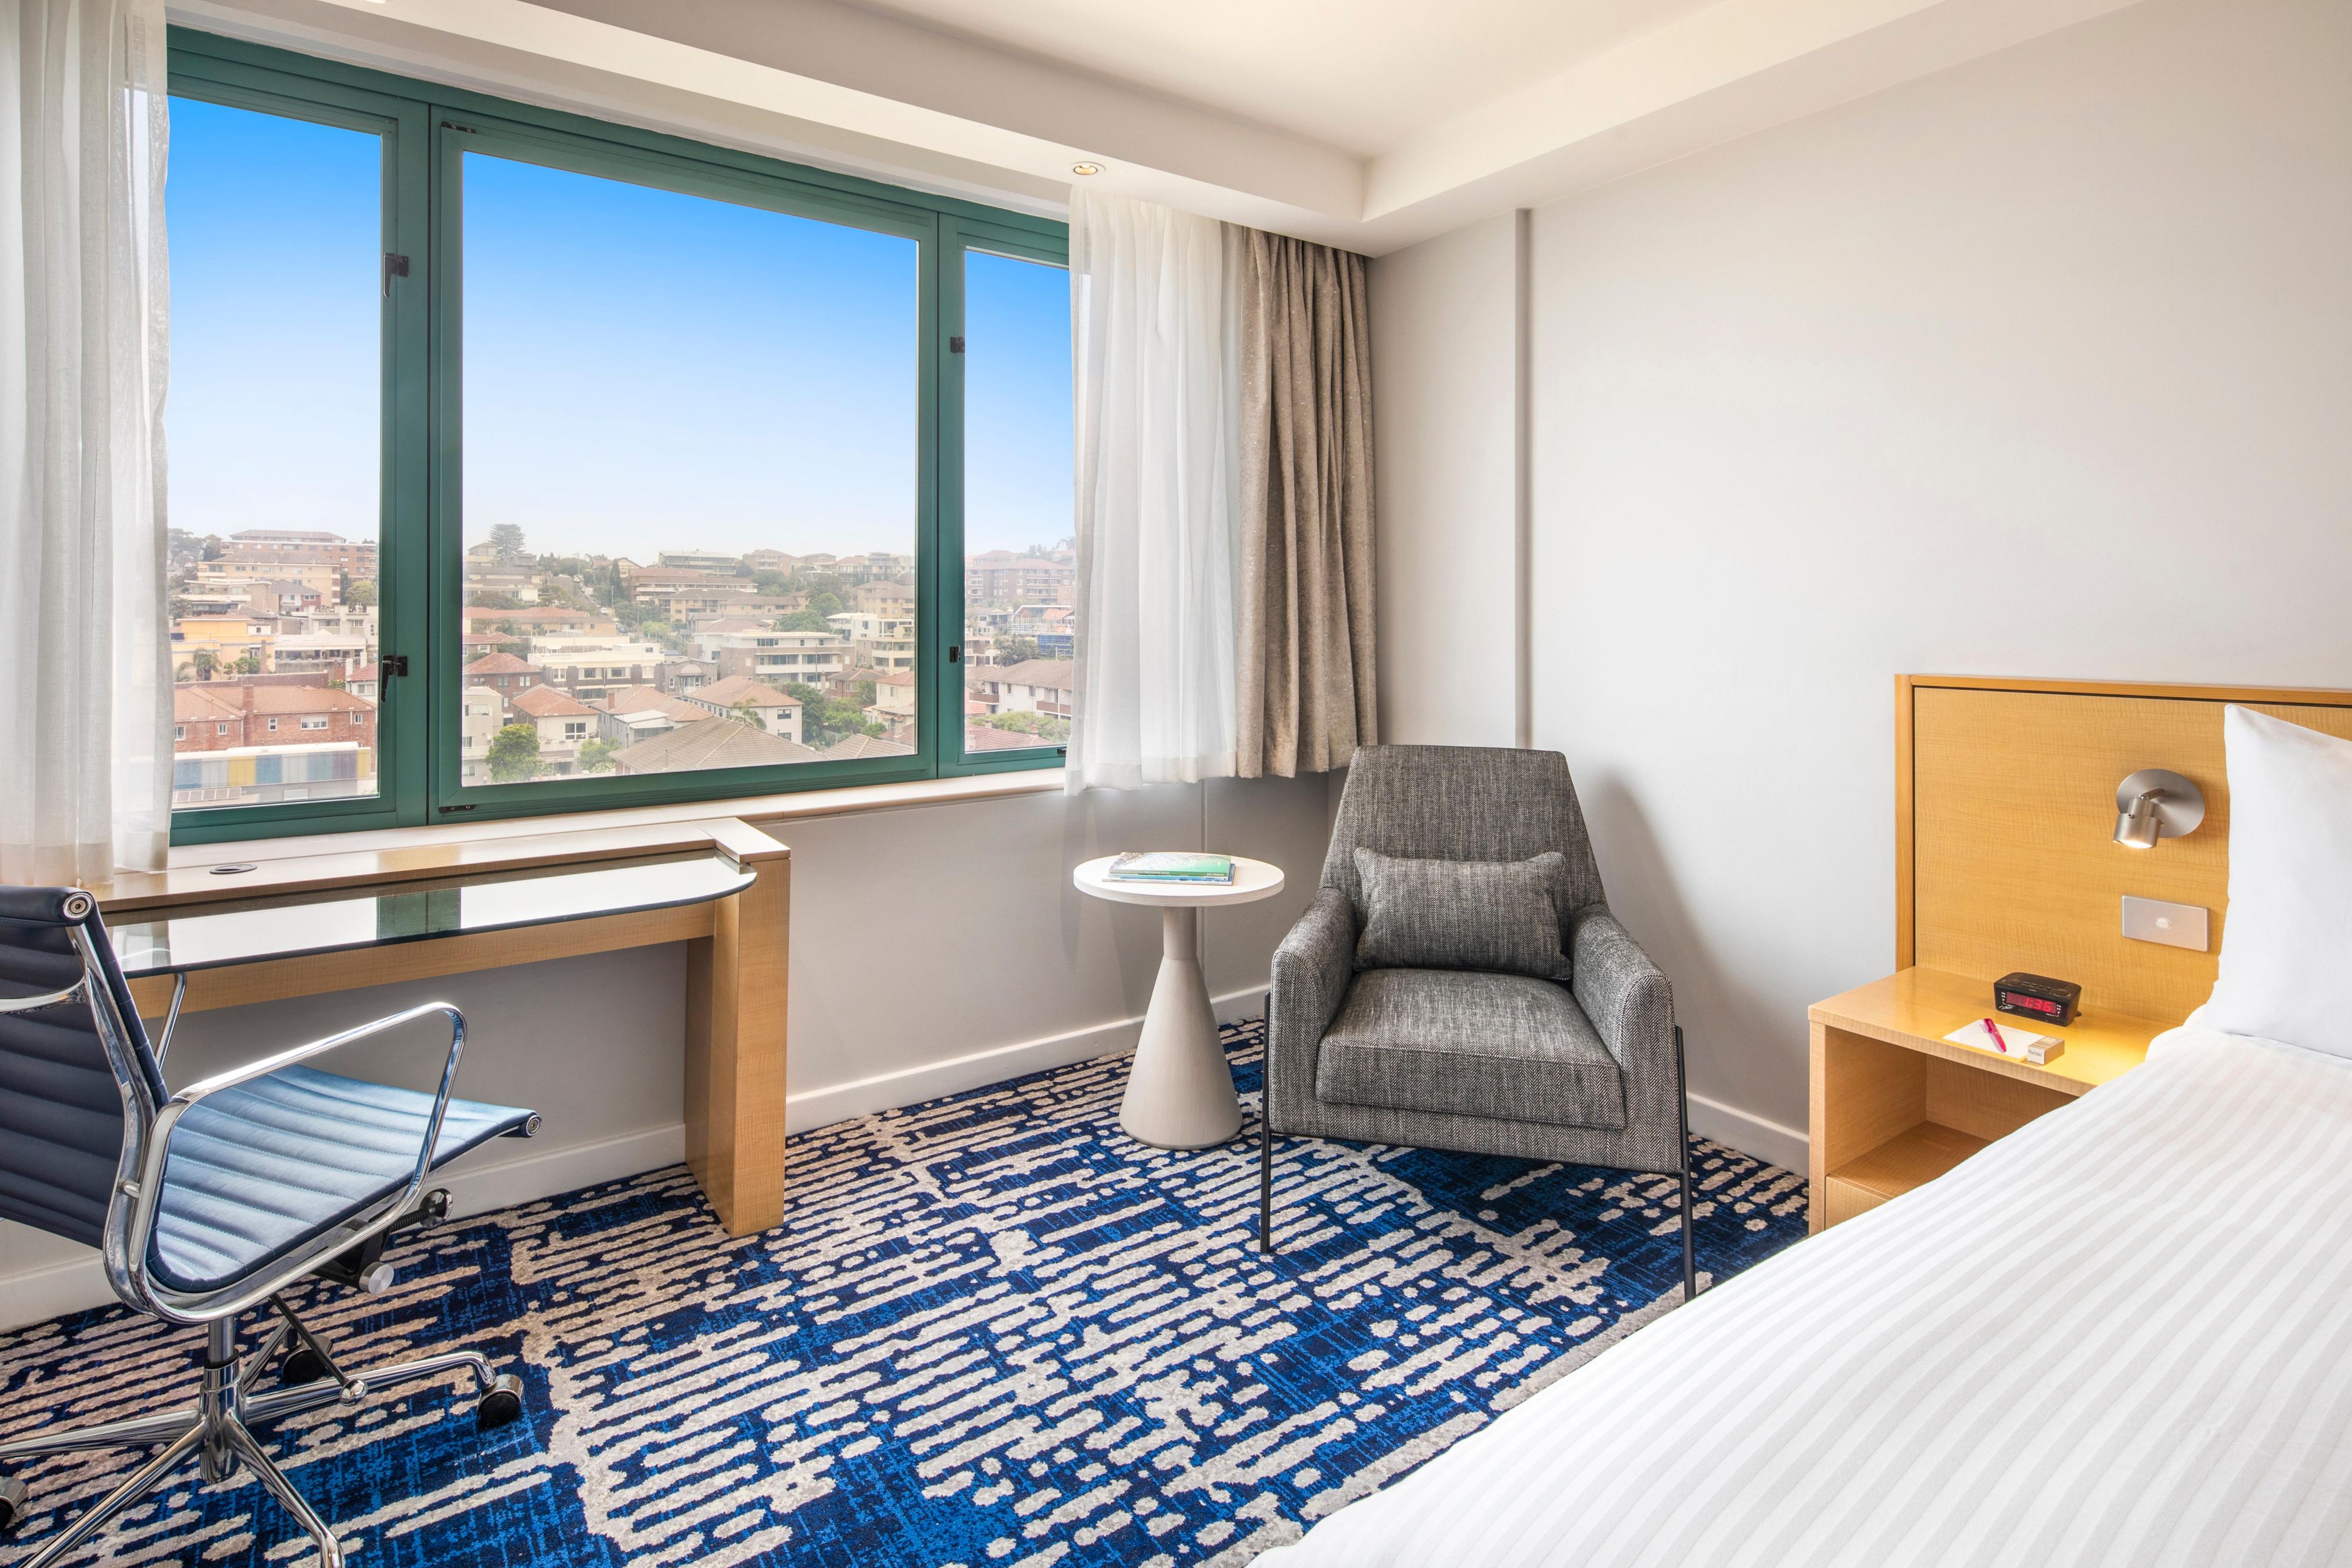 Guest Room with district views over Coogee Village